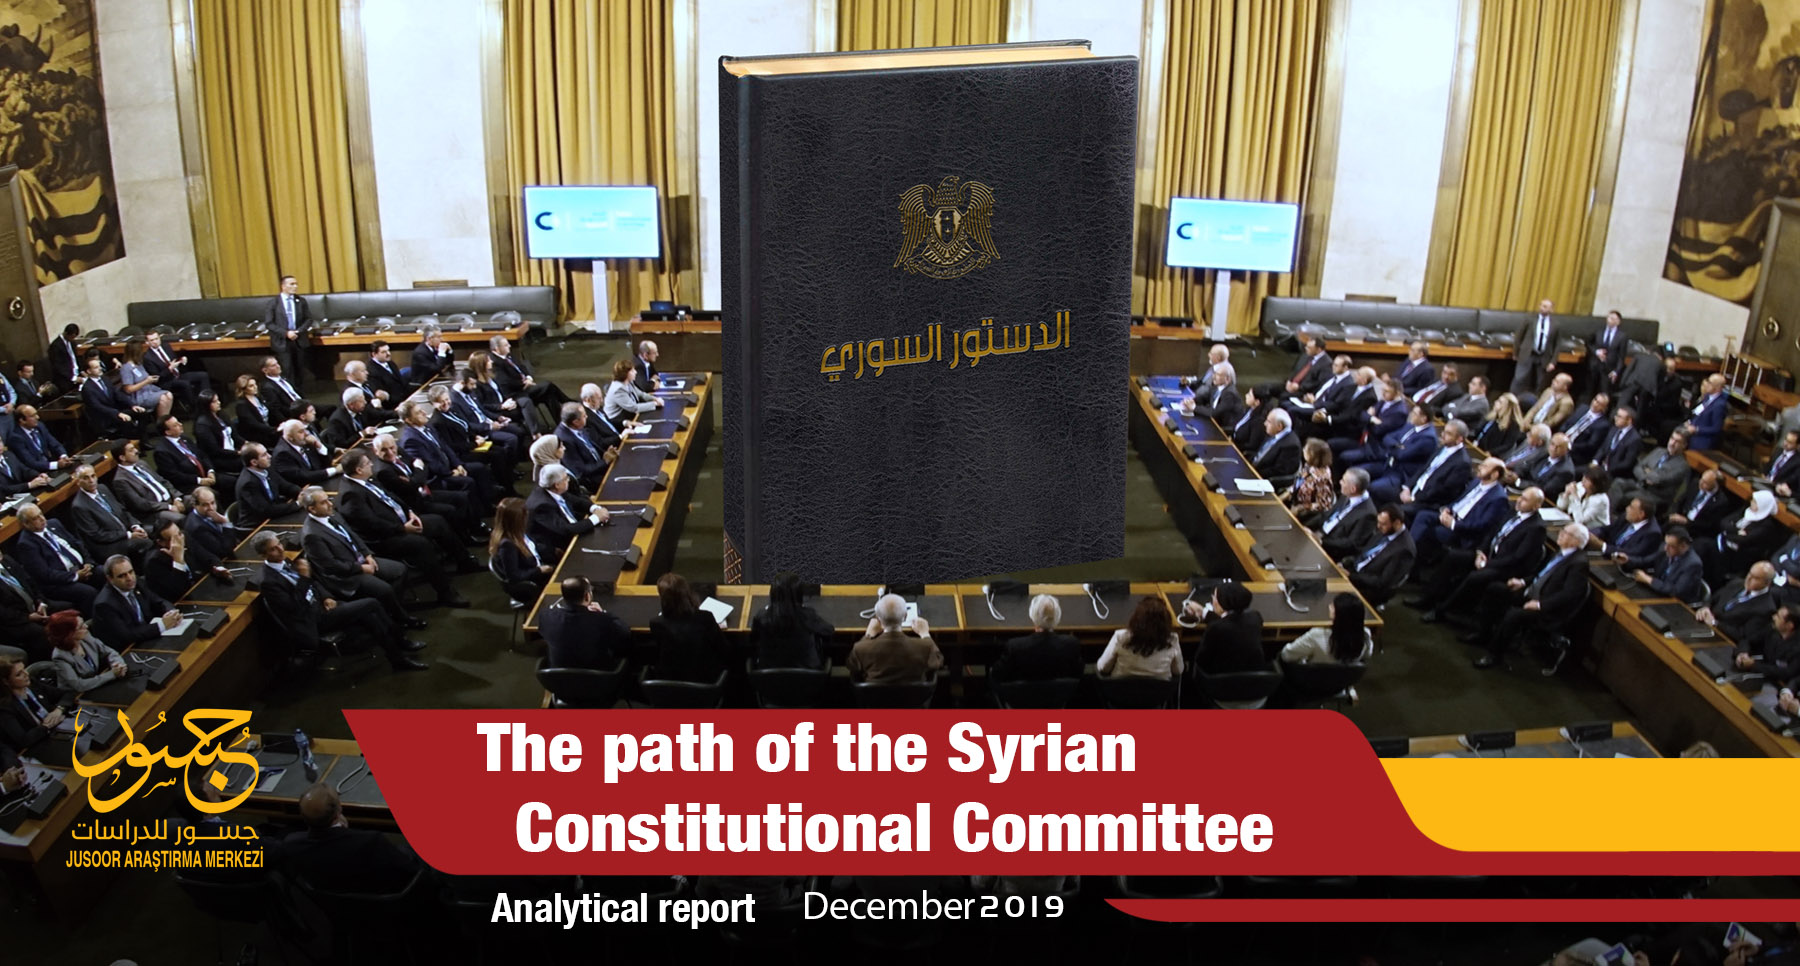 The path of the Syrian Constitutional Committee